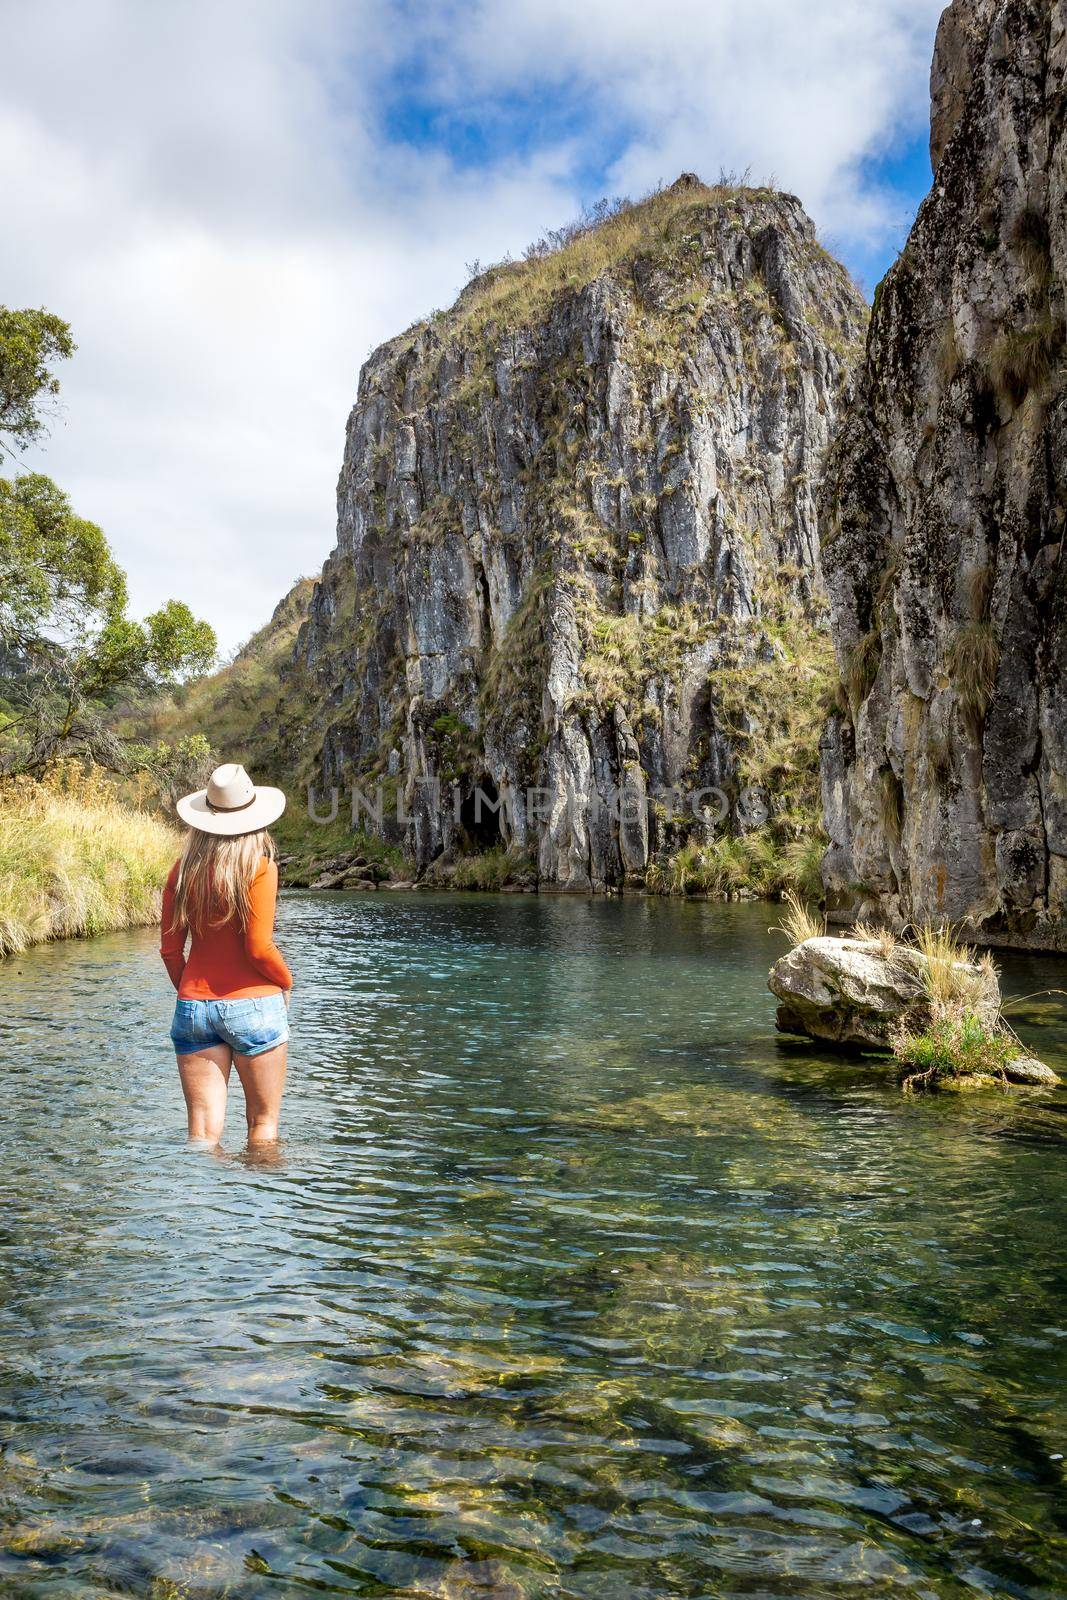 A woman traveller in high country Australia stands in a shallow mountain stream with views to mountain caves eroded by the water